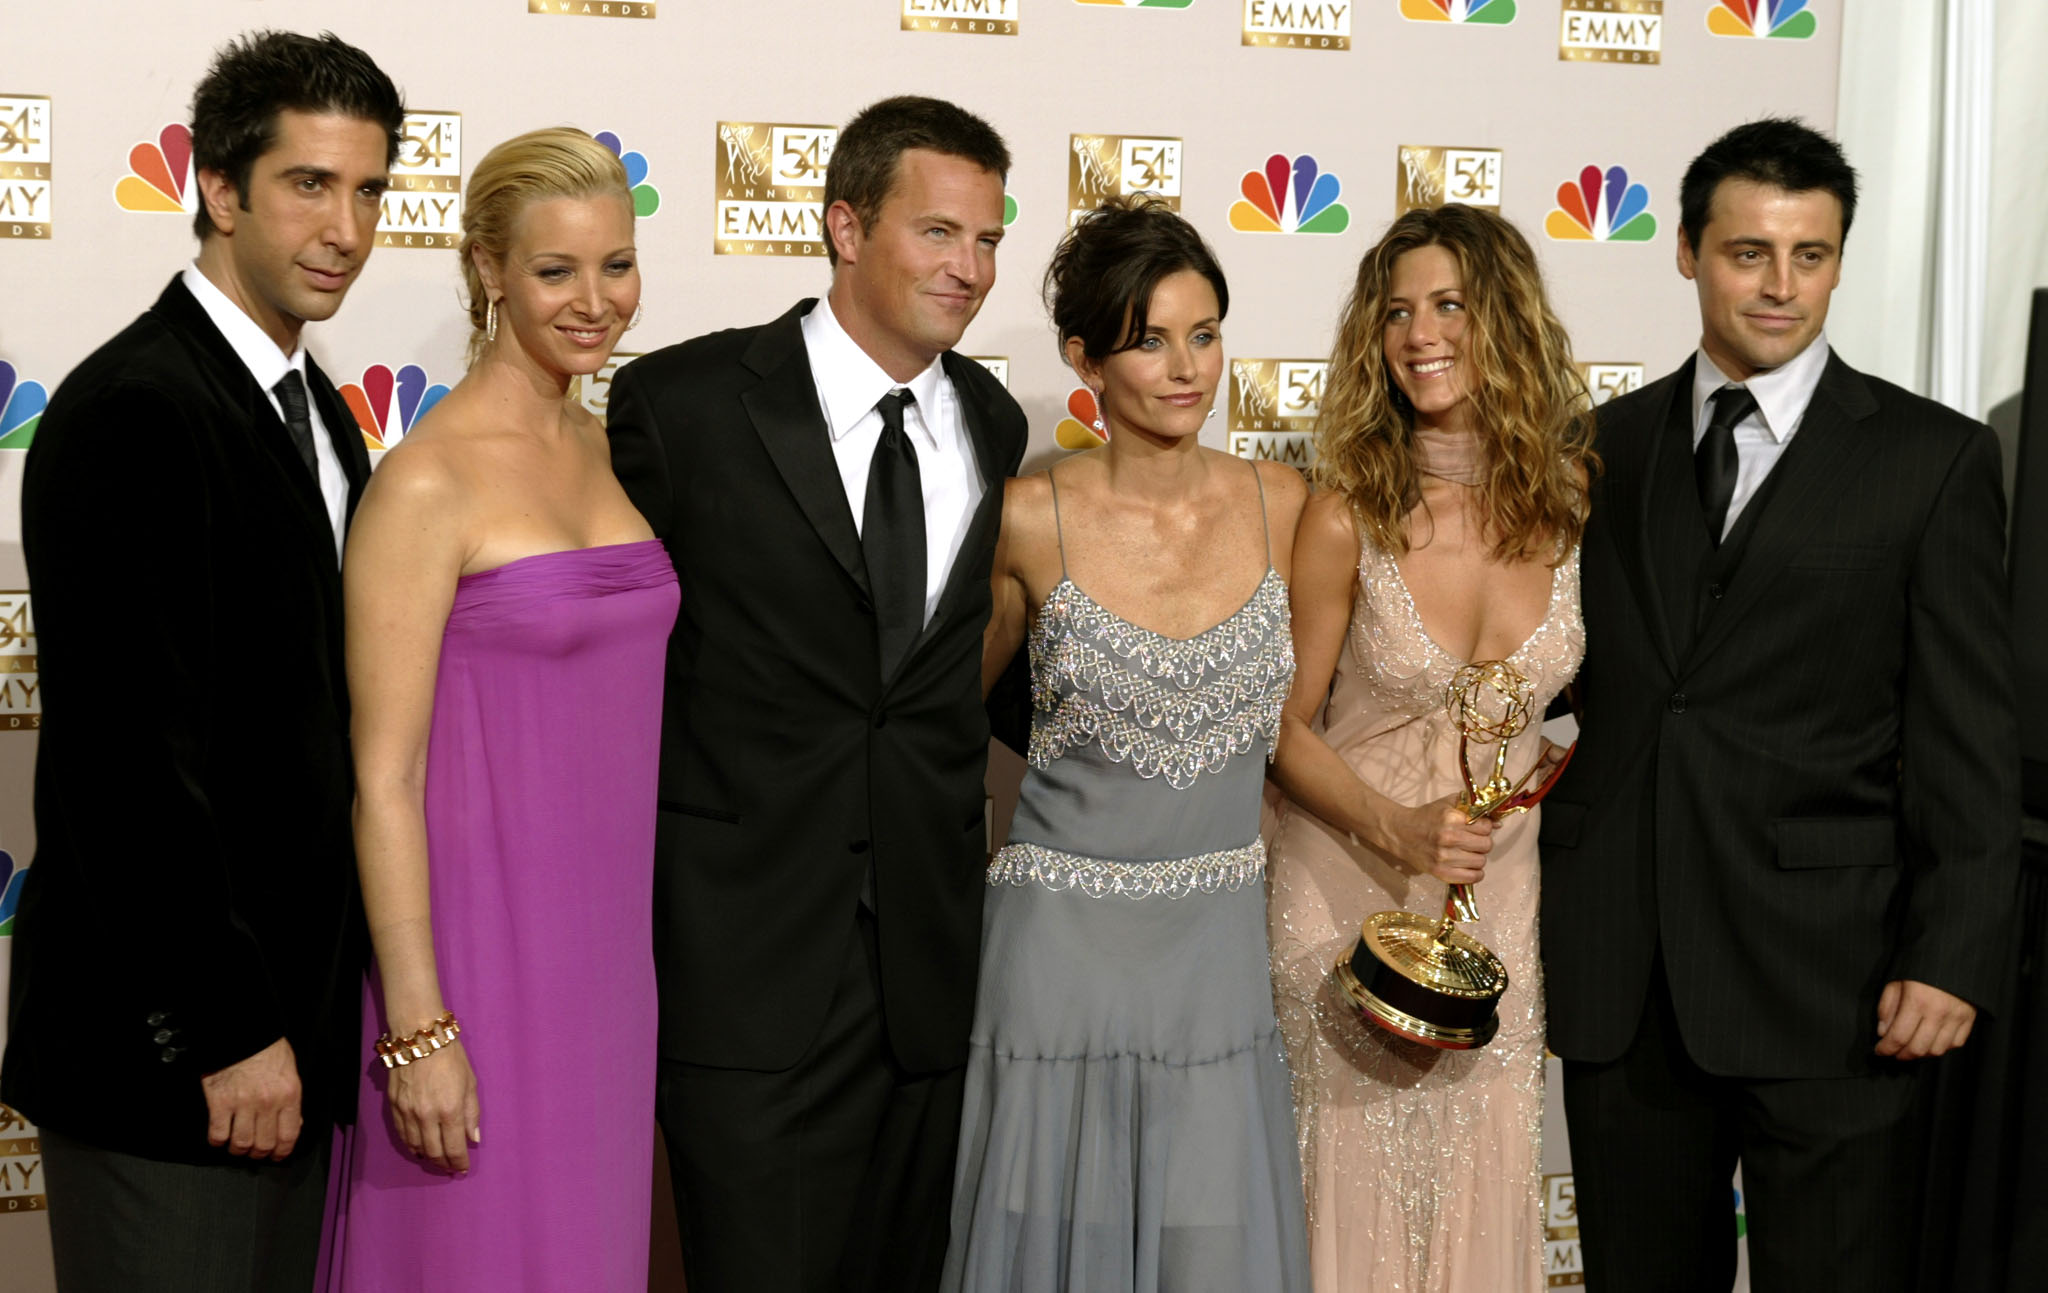 FRIENDS CAST APPEARS WITH WINNER JENNIFER ANISTON AT EMMY AWARDS.